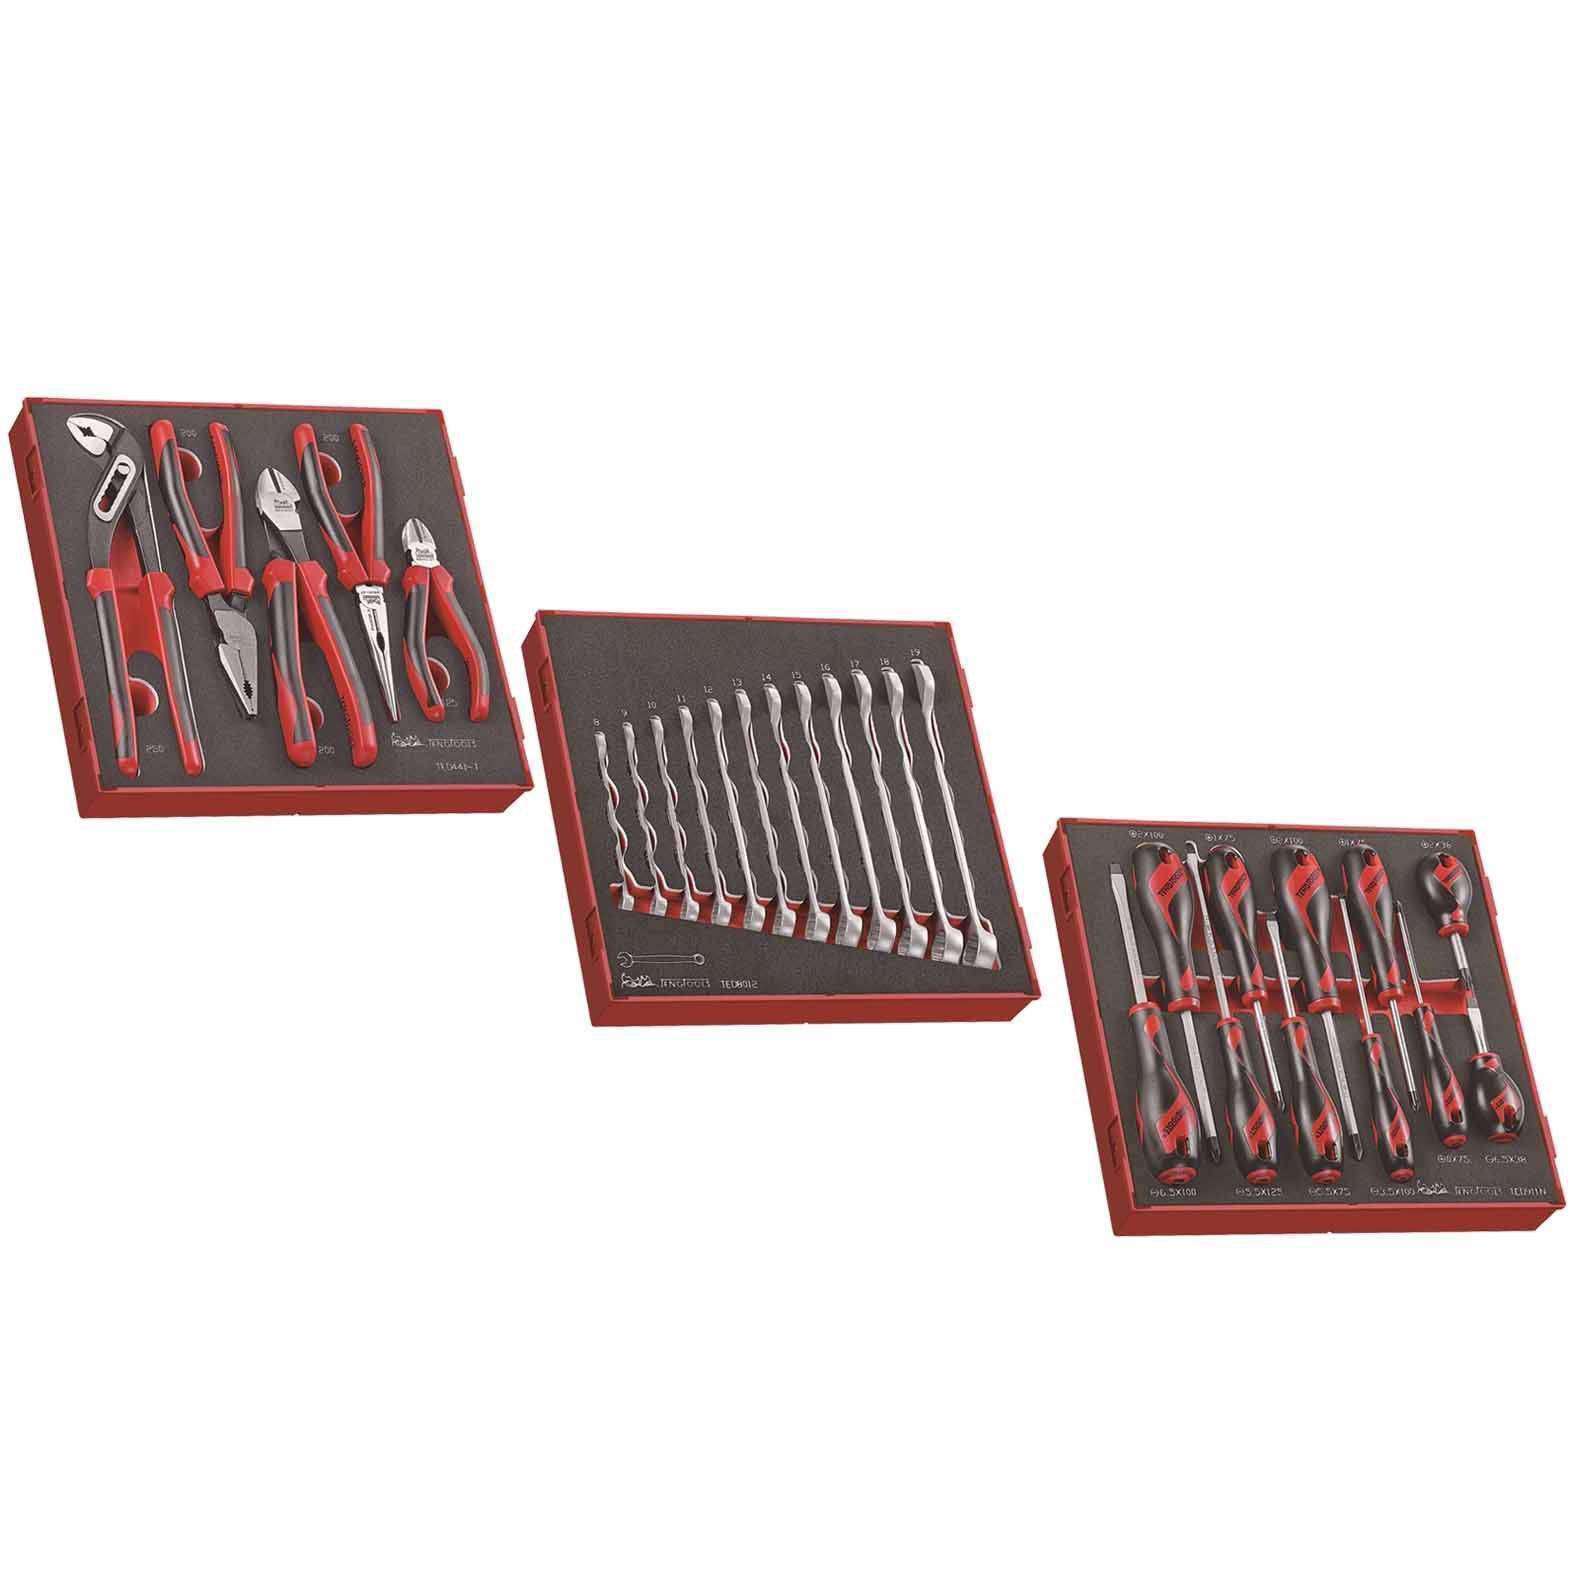 Teng Tools 28 Piece Plier, Combination Wrench, And Mixed Screwdriver Set - TED441T